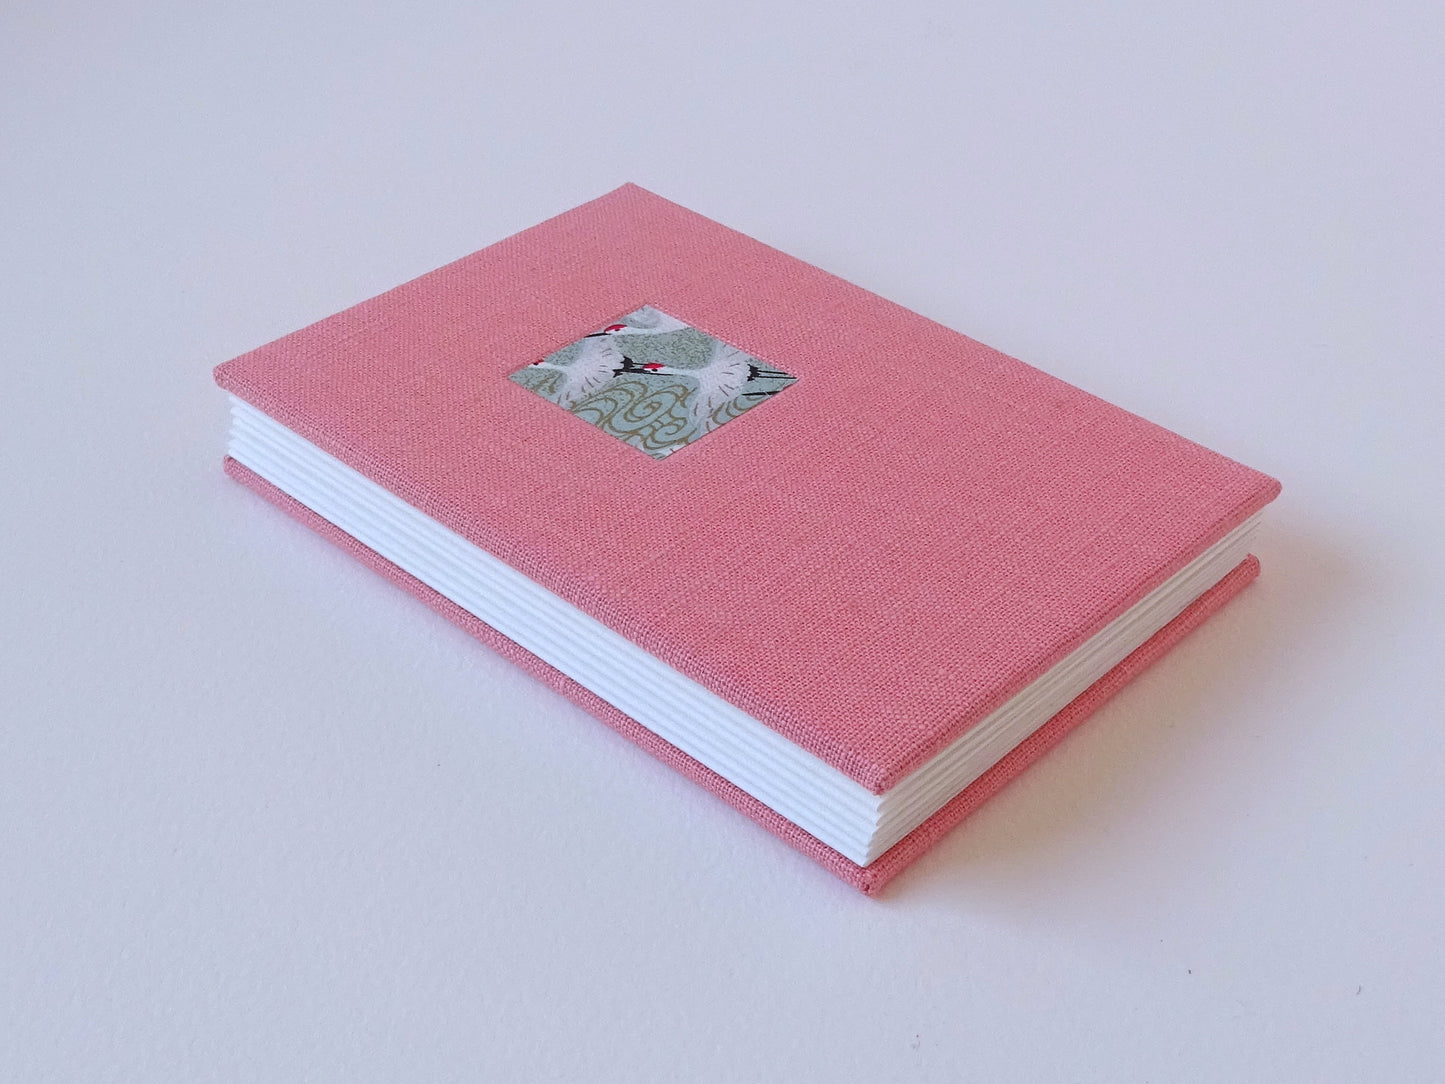 Celandine books coral pink linen concertina watercolour sketchbook with chiyogami